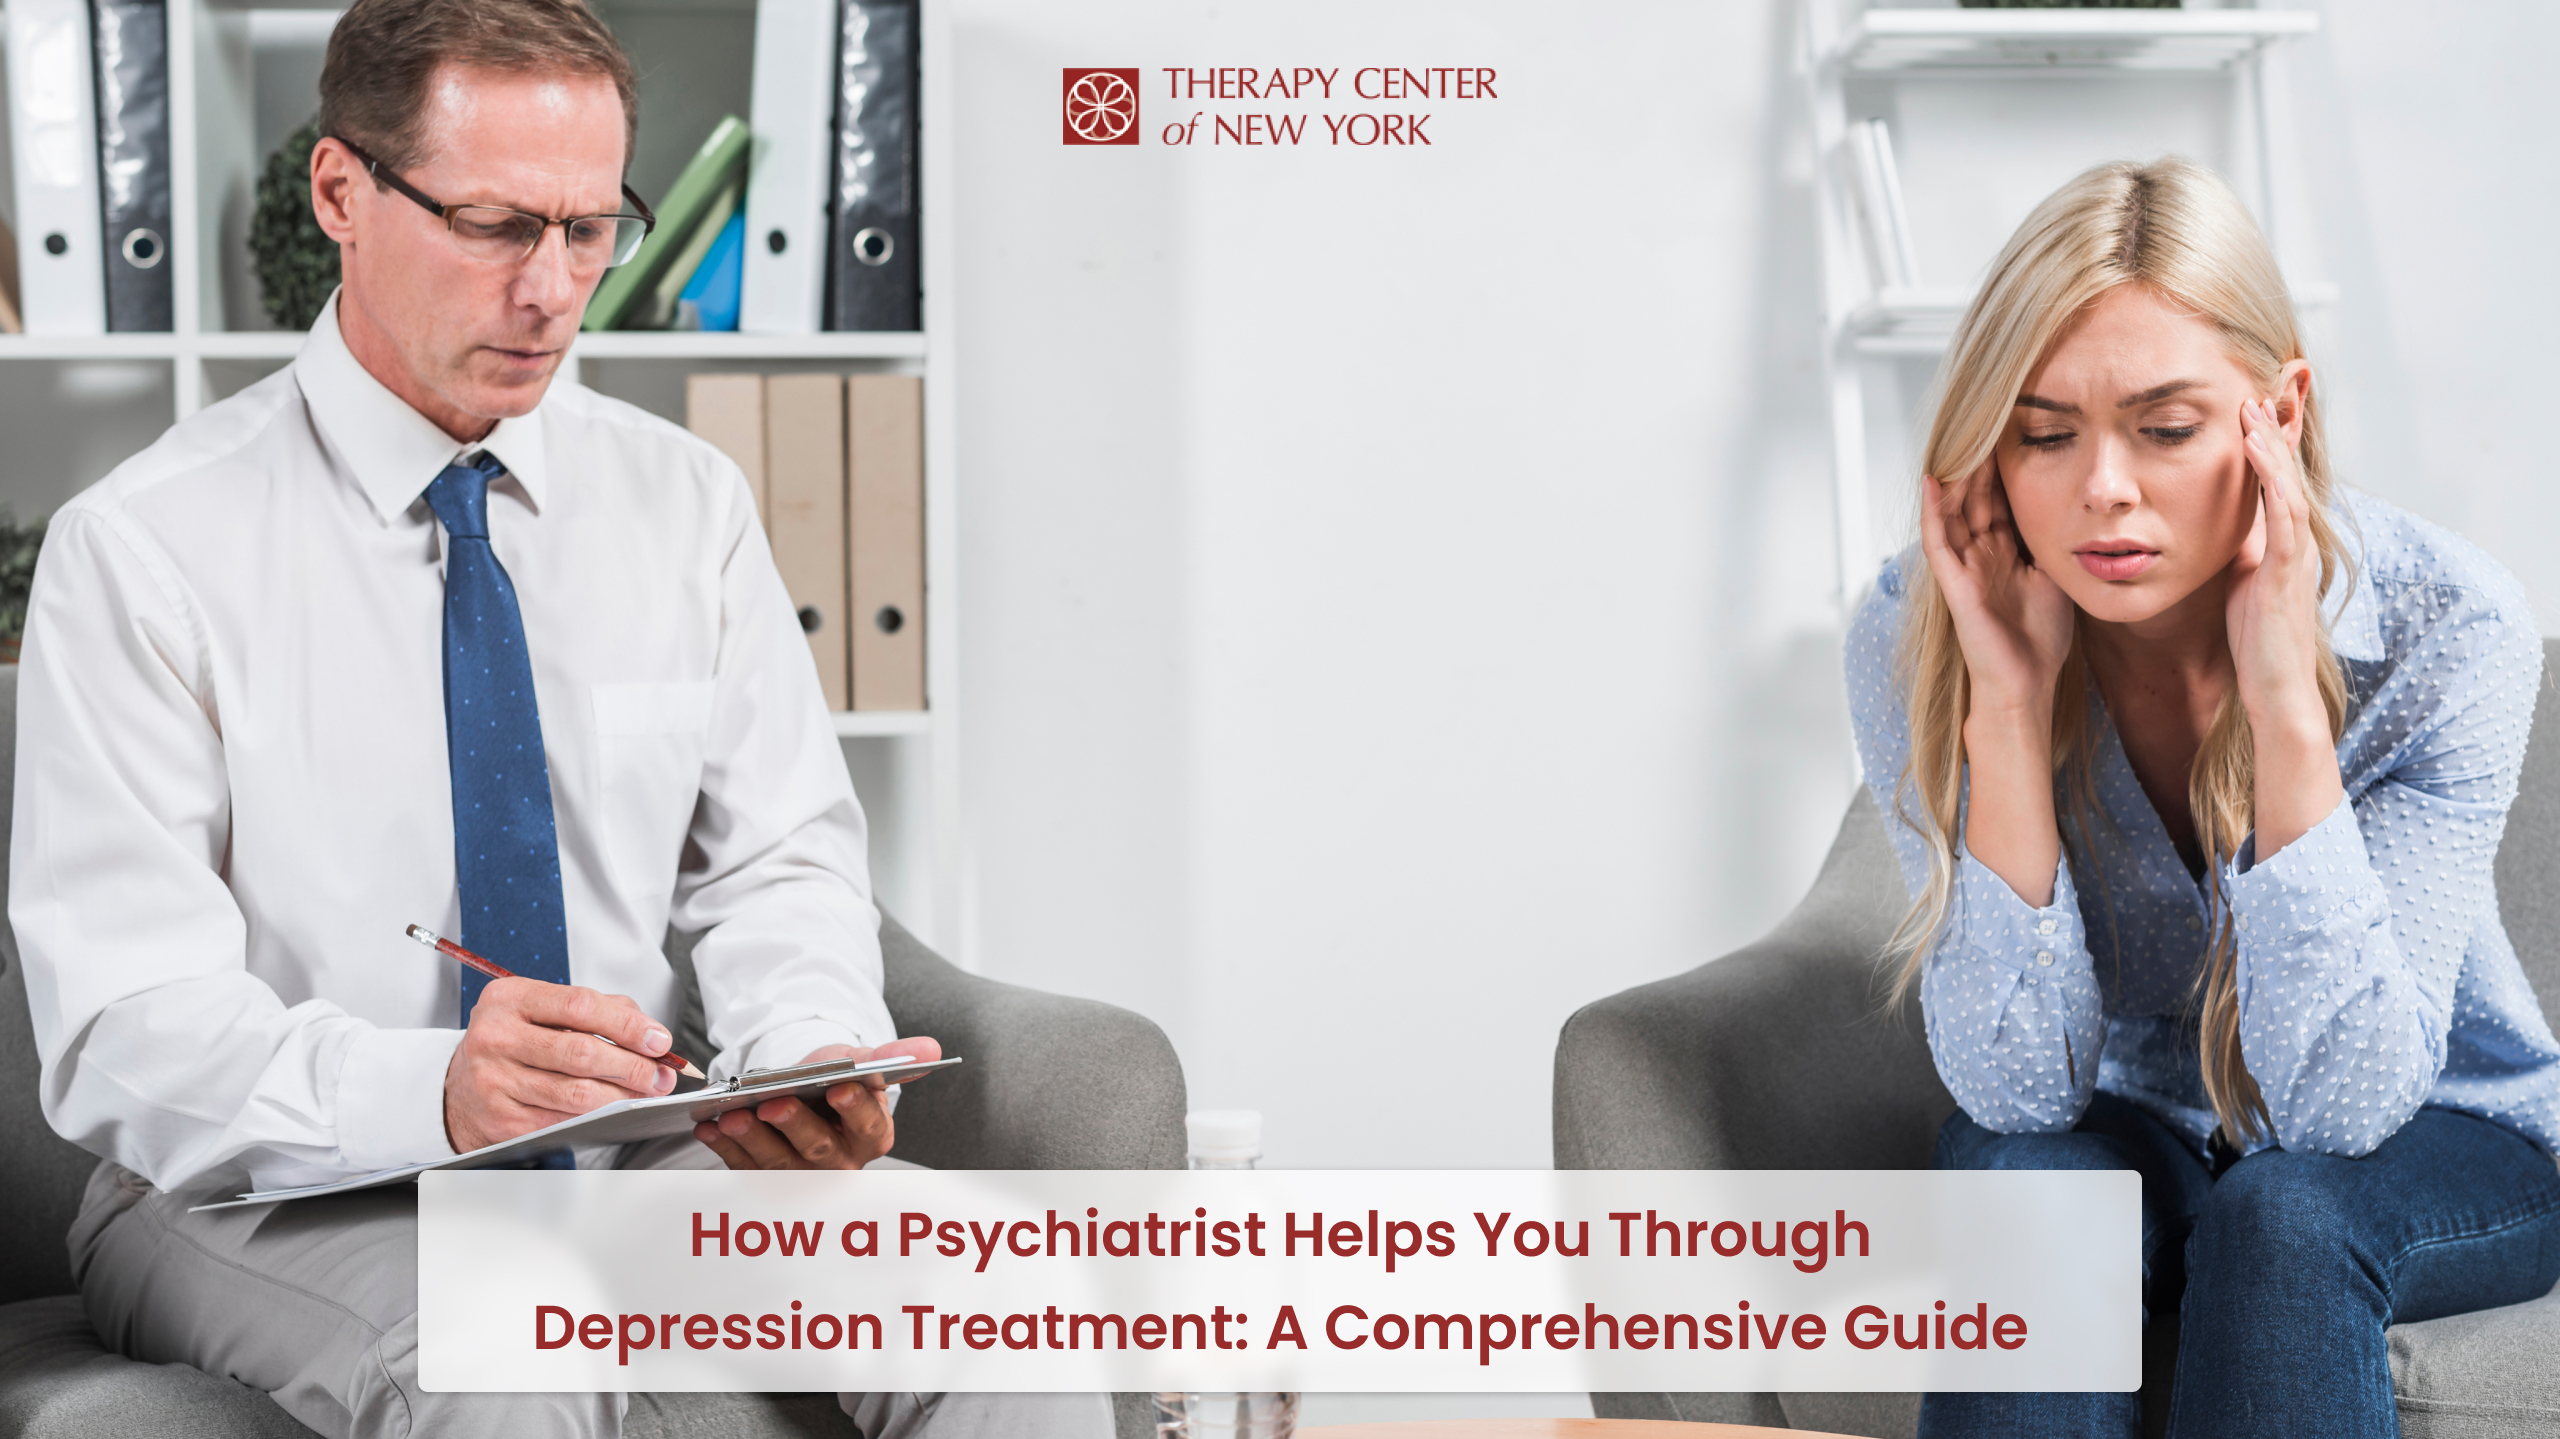 Psychiatrist providing support to a patient, guiding them through depression treatment.